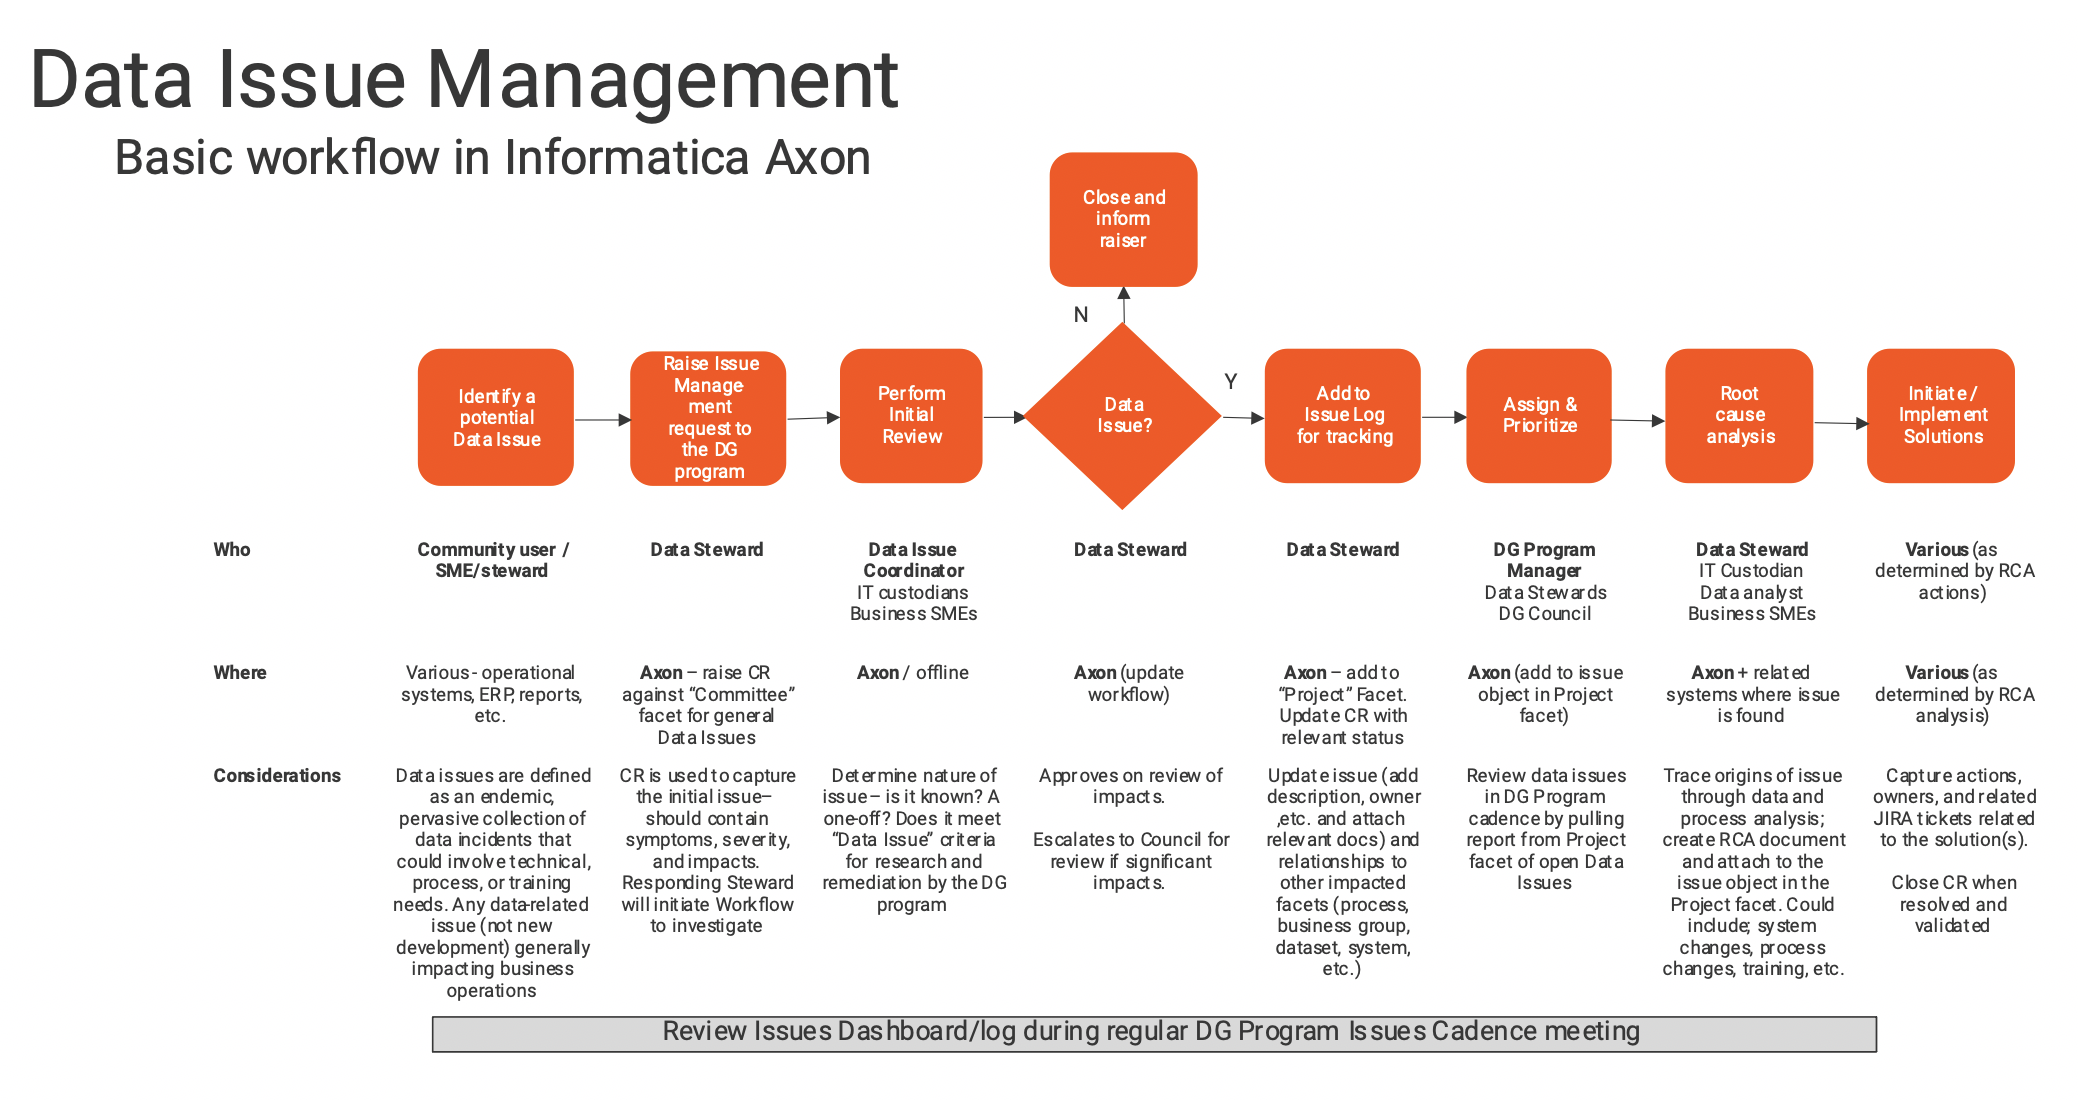 Workflow image of how the data issue management process is implemented by Axon.